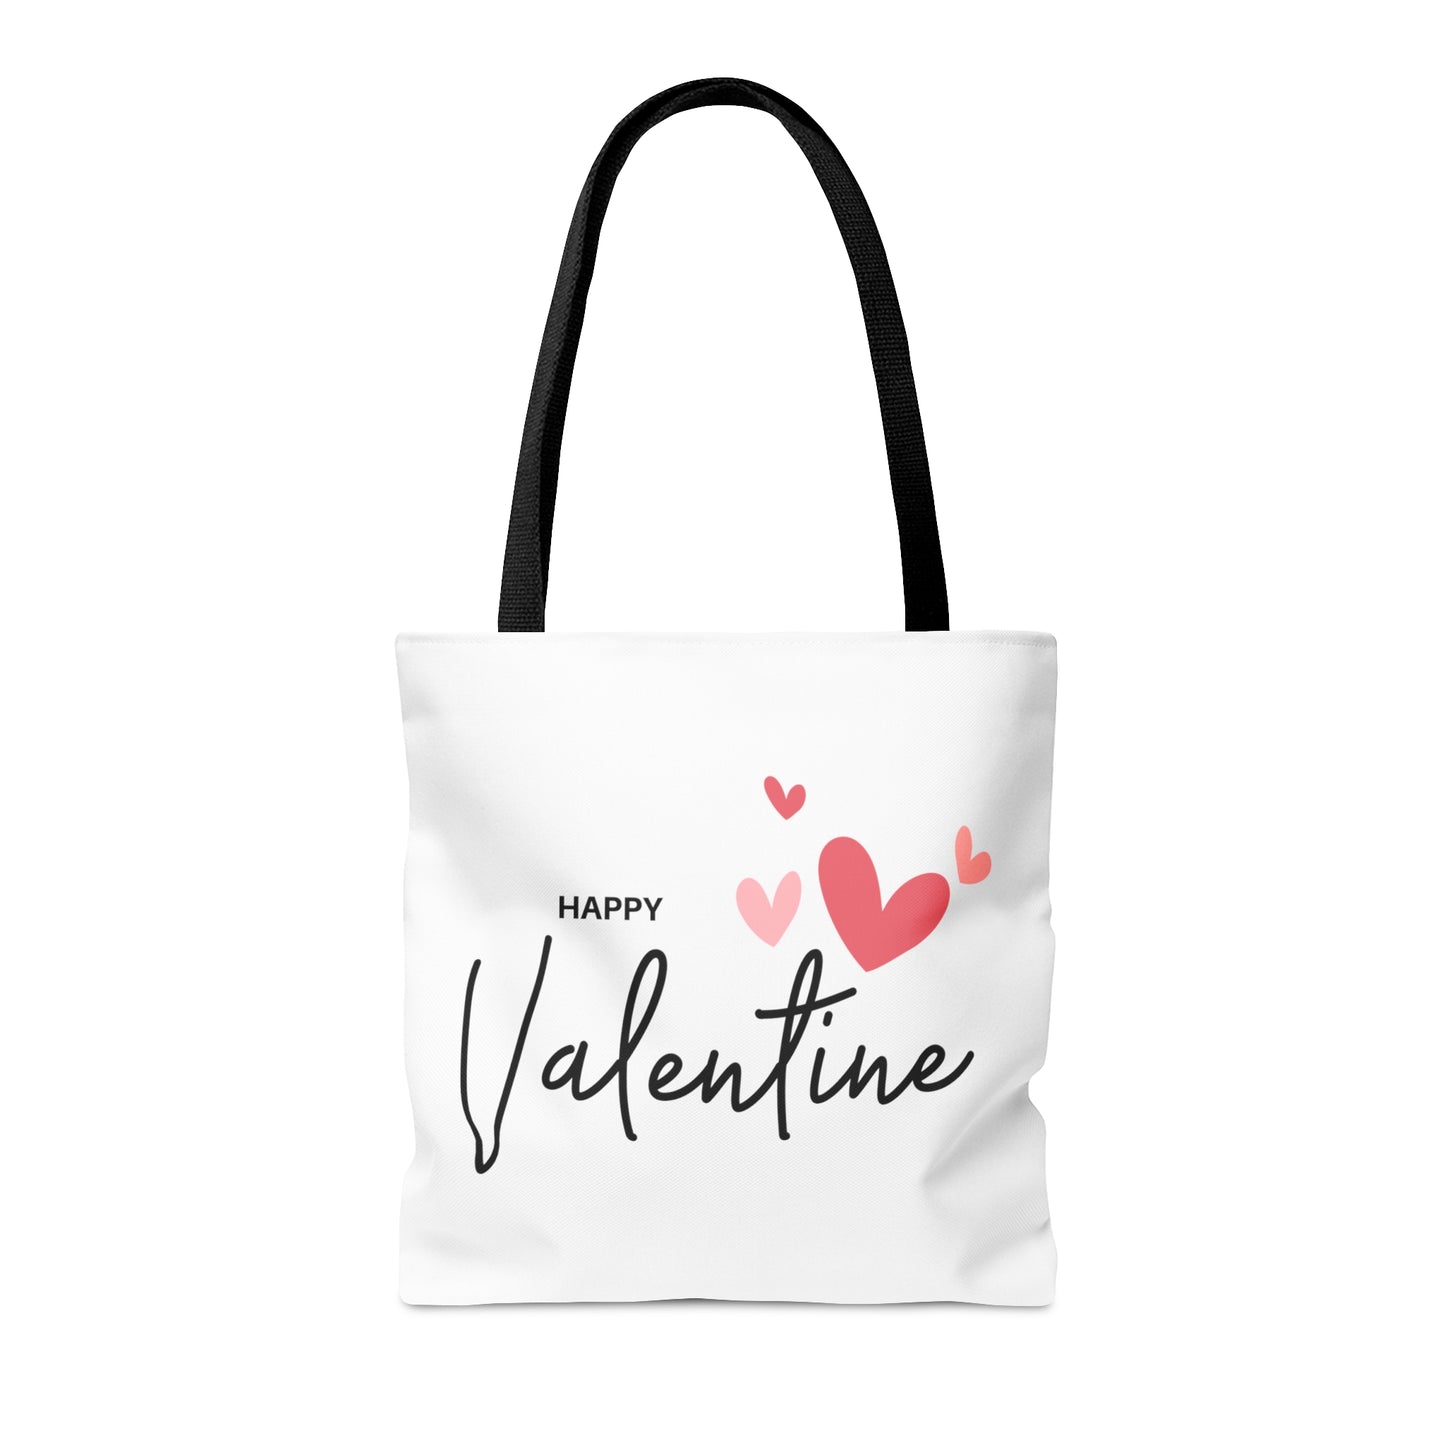 Valentine Tote Bag, Happy Valentine with Flying Heart Printed Tote Bag, 3 Sizes